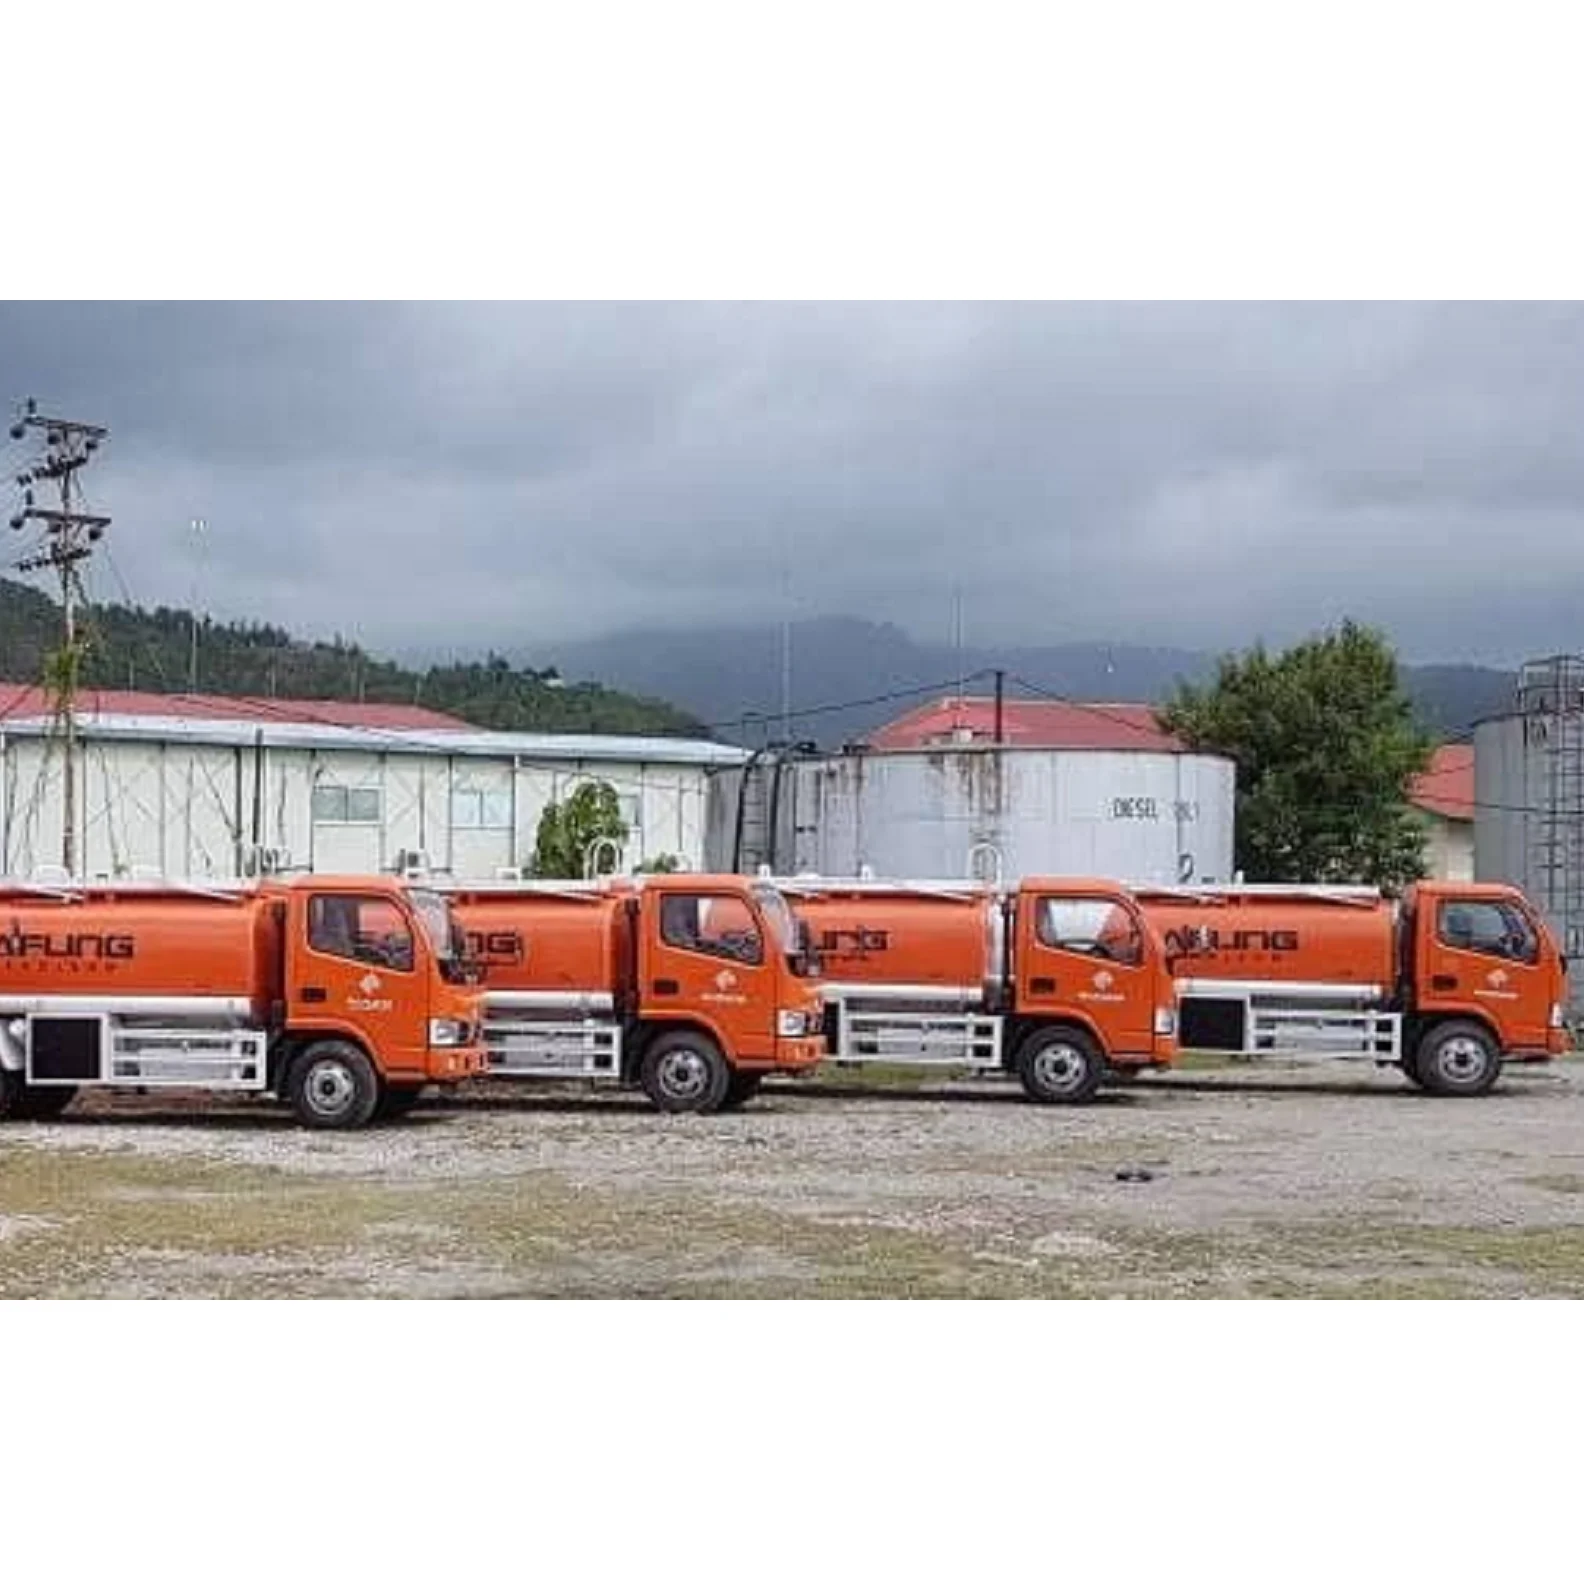 390 microns Road trucks Plantation Quarry and mining Lorry Cars Trains Diesel From Malaysia